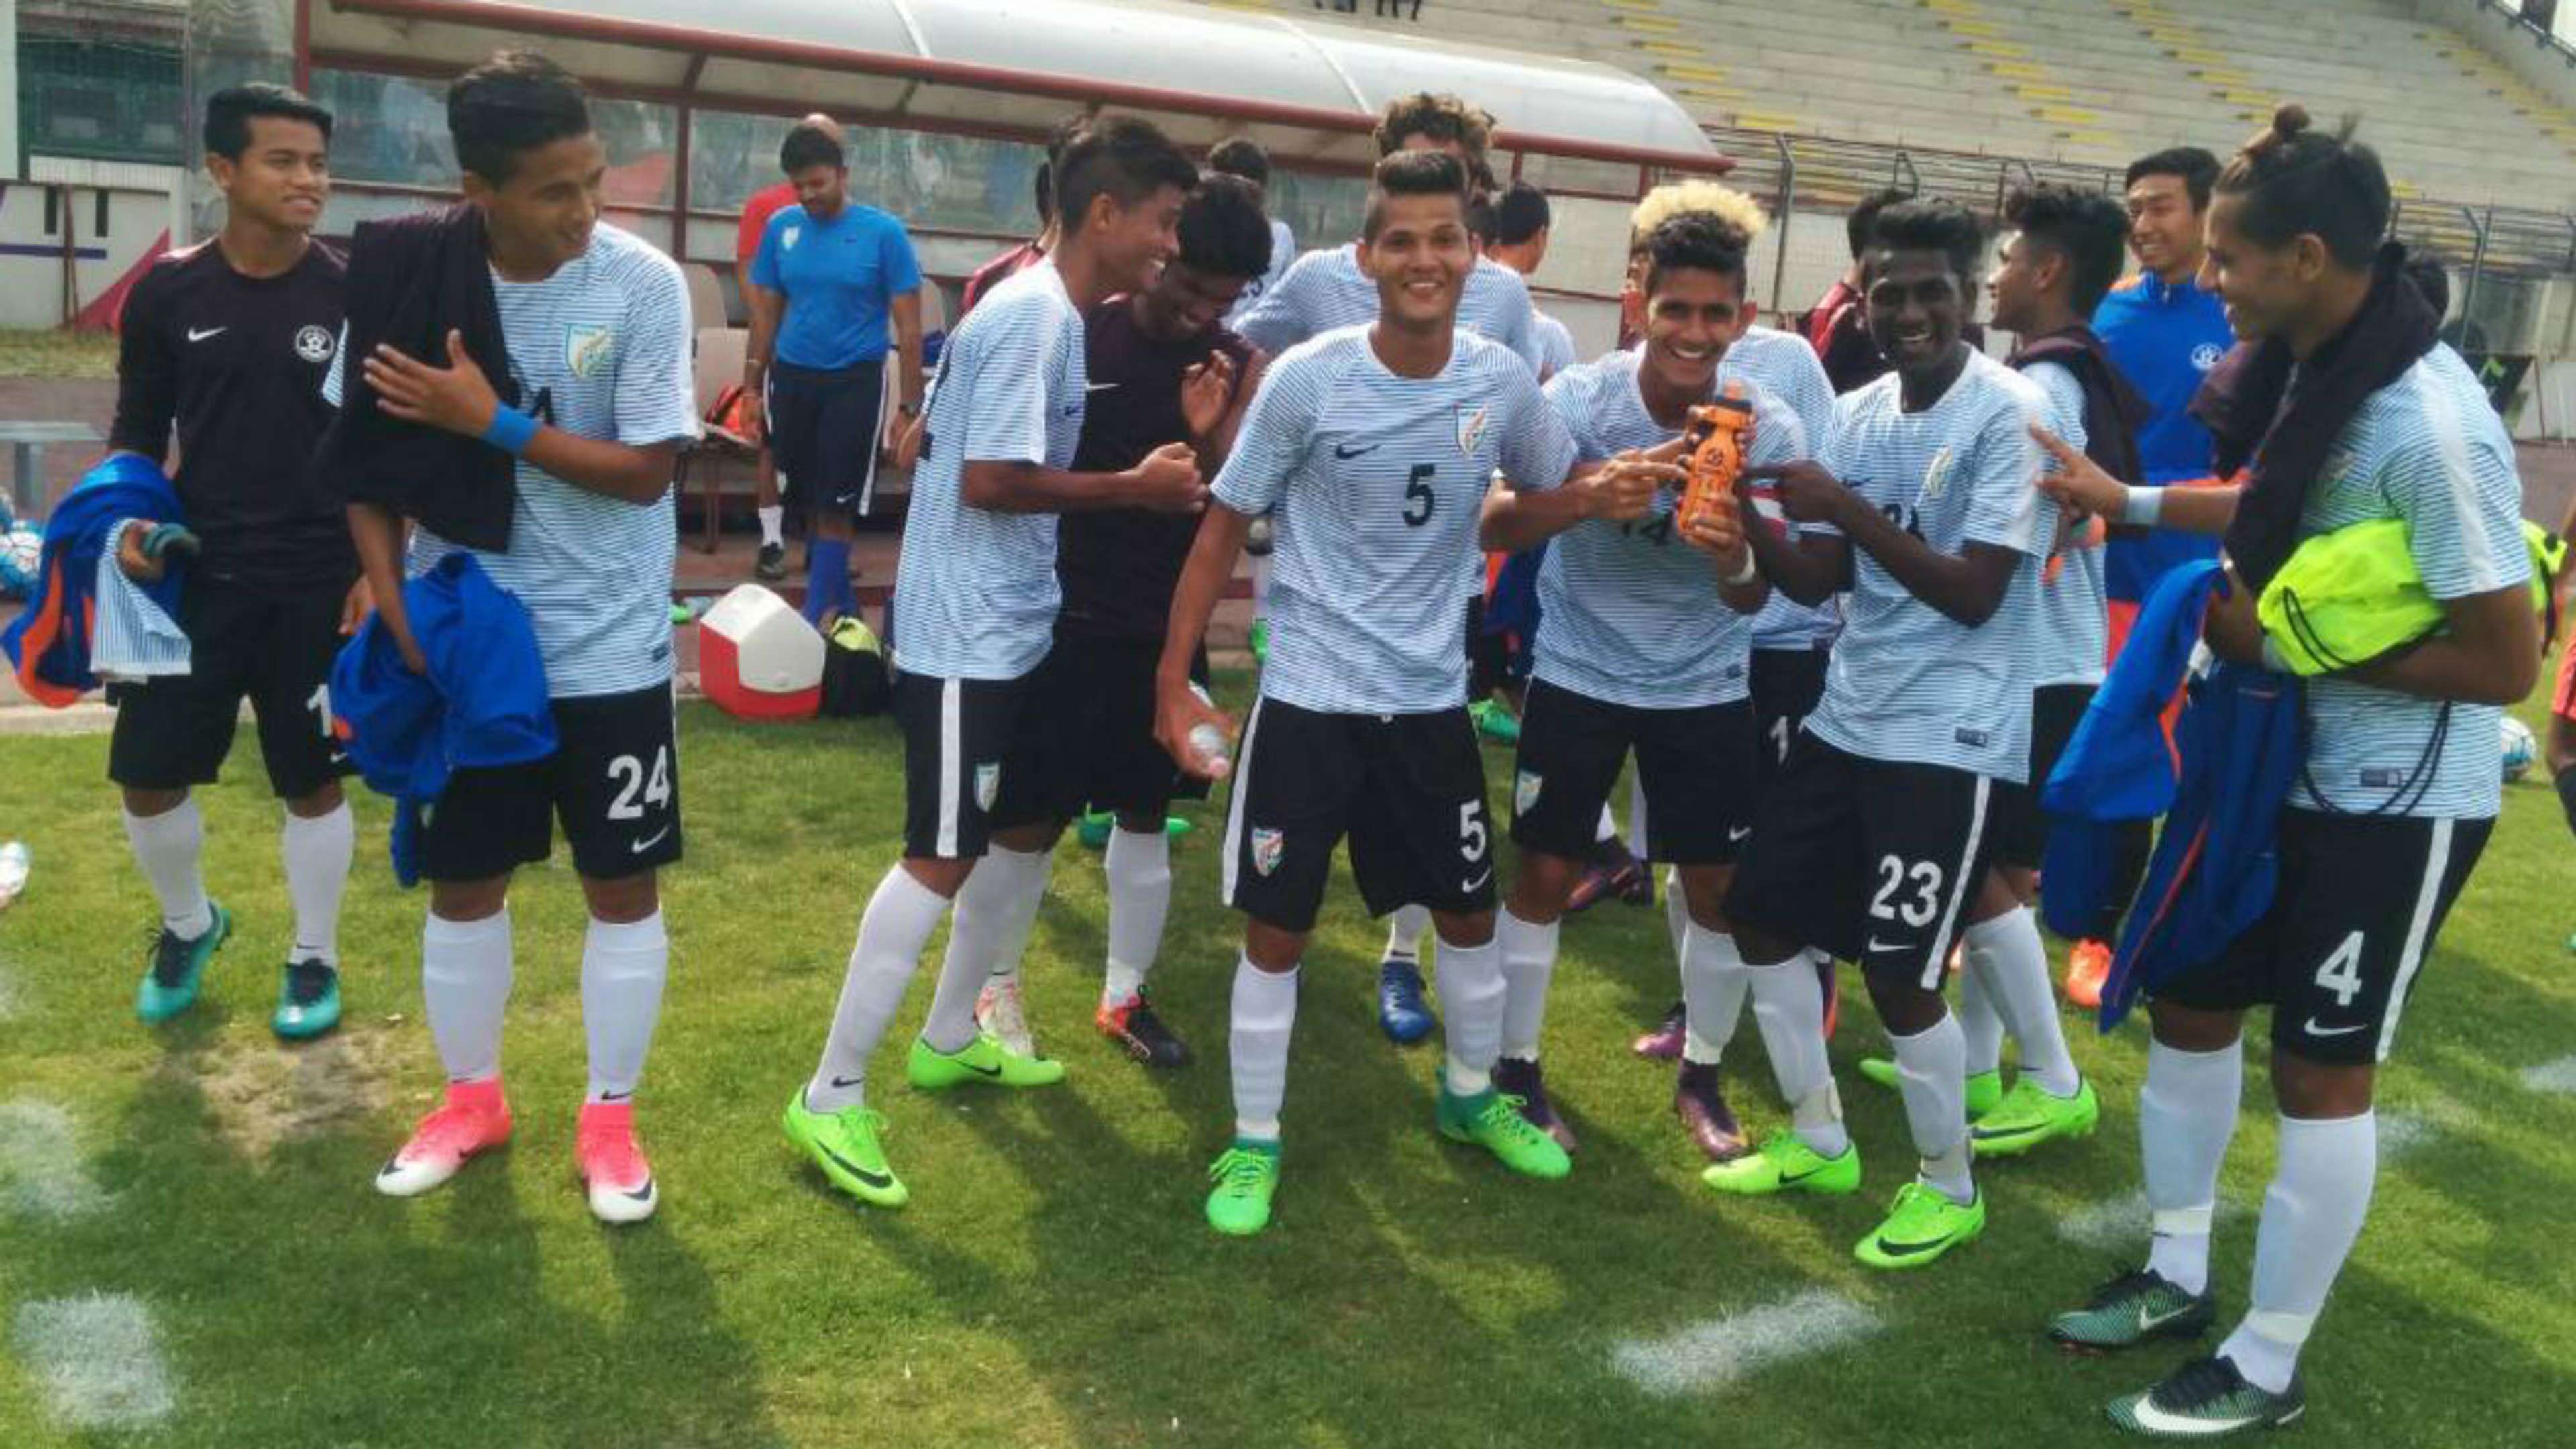 Indian U-17 World Cup Squad’s clash against Italy U-17 National Team.